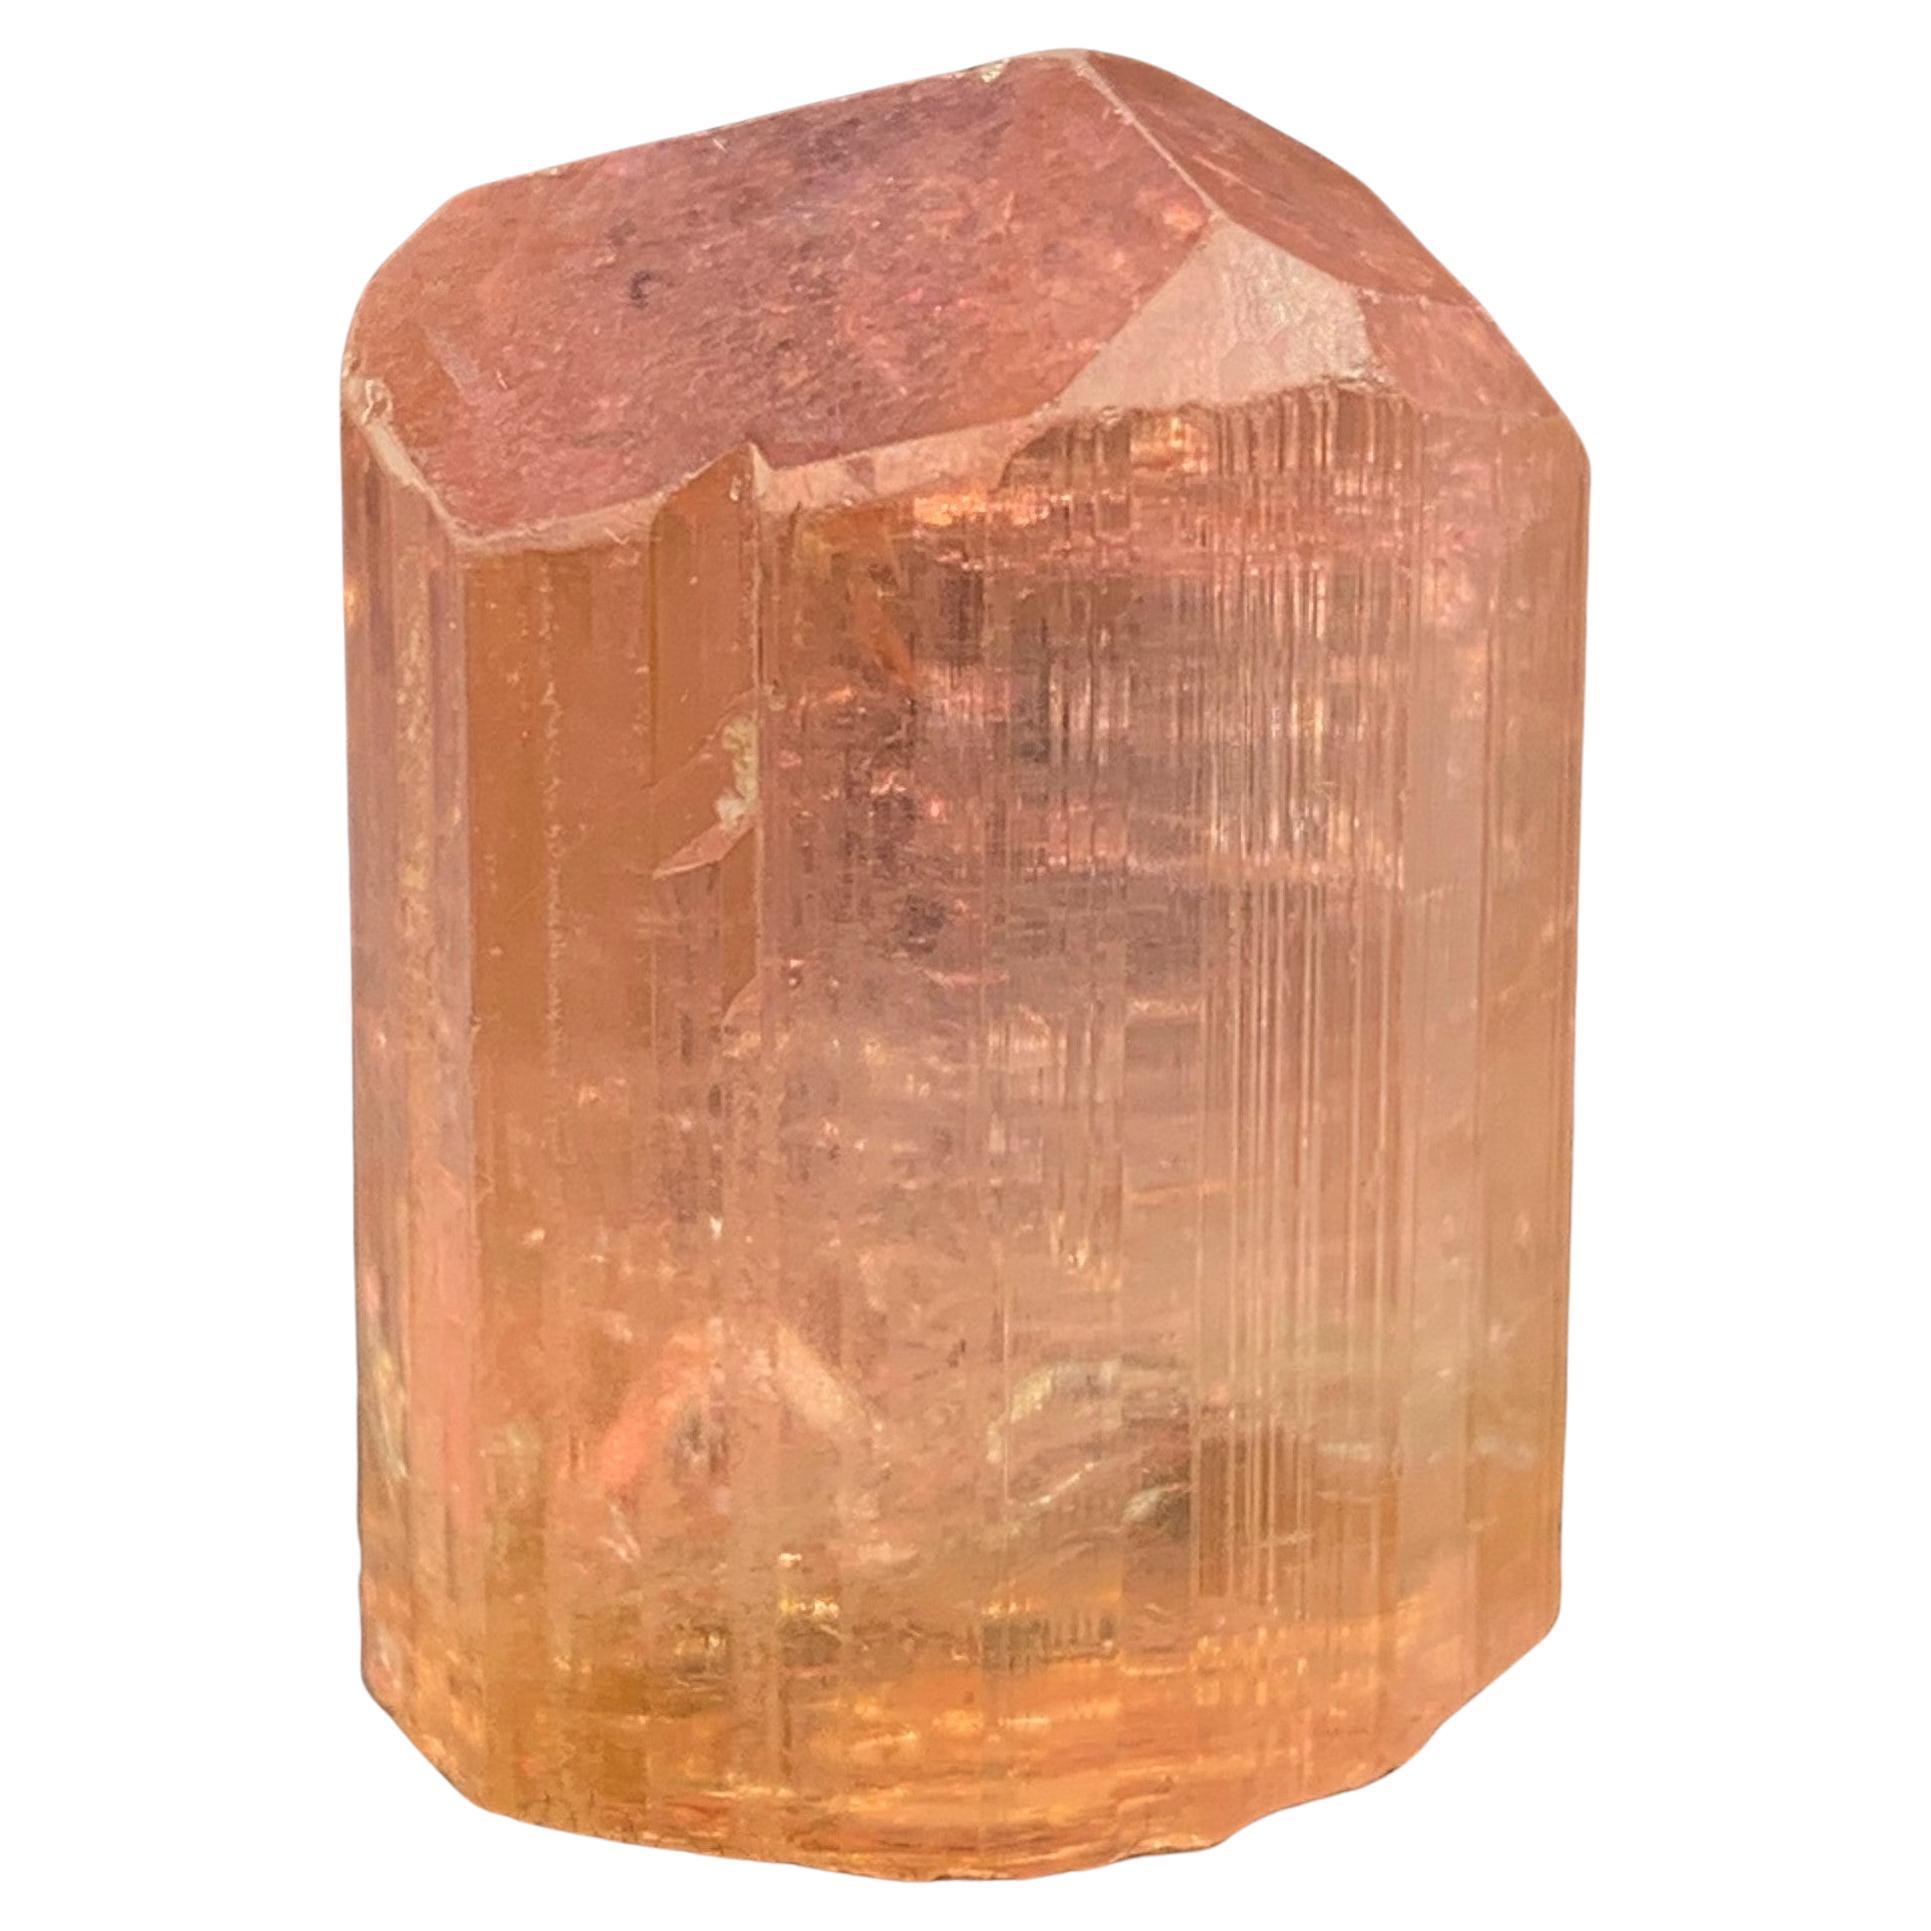 62.70 Carat Lovely Peach Color Tourmaline Crystal from Paprook, Afghanistan For Sale